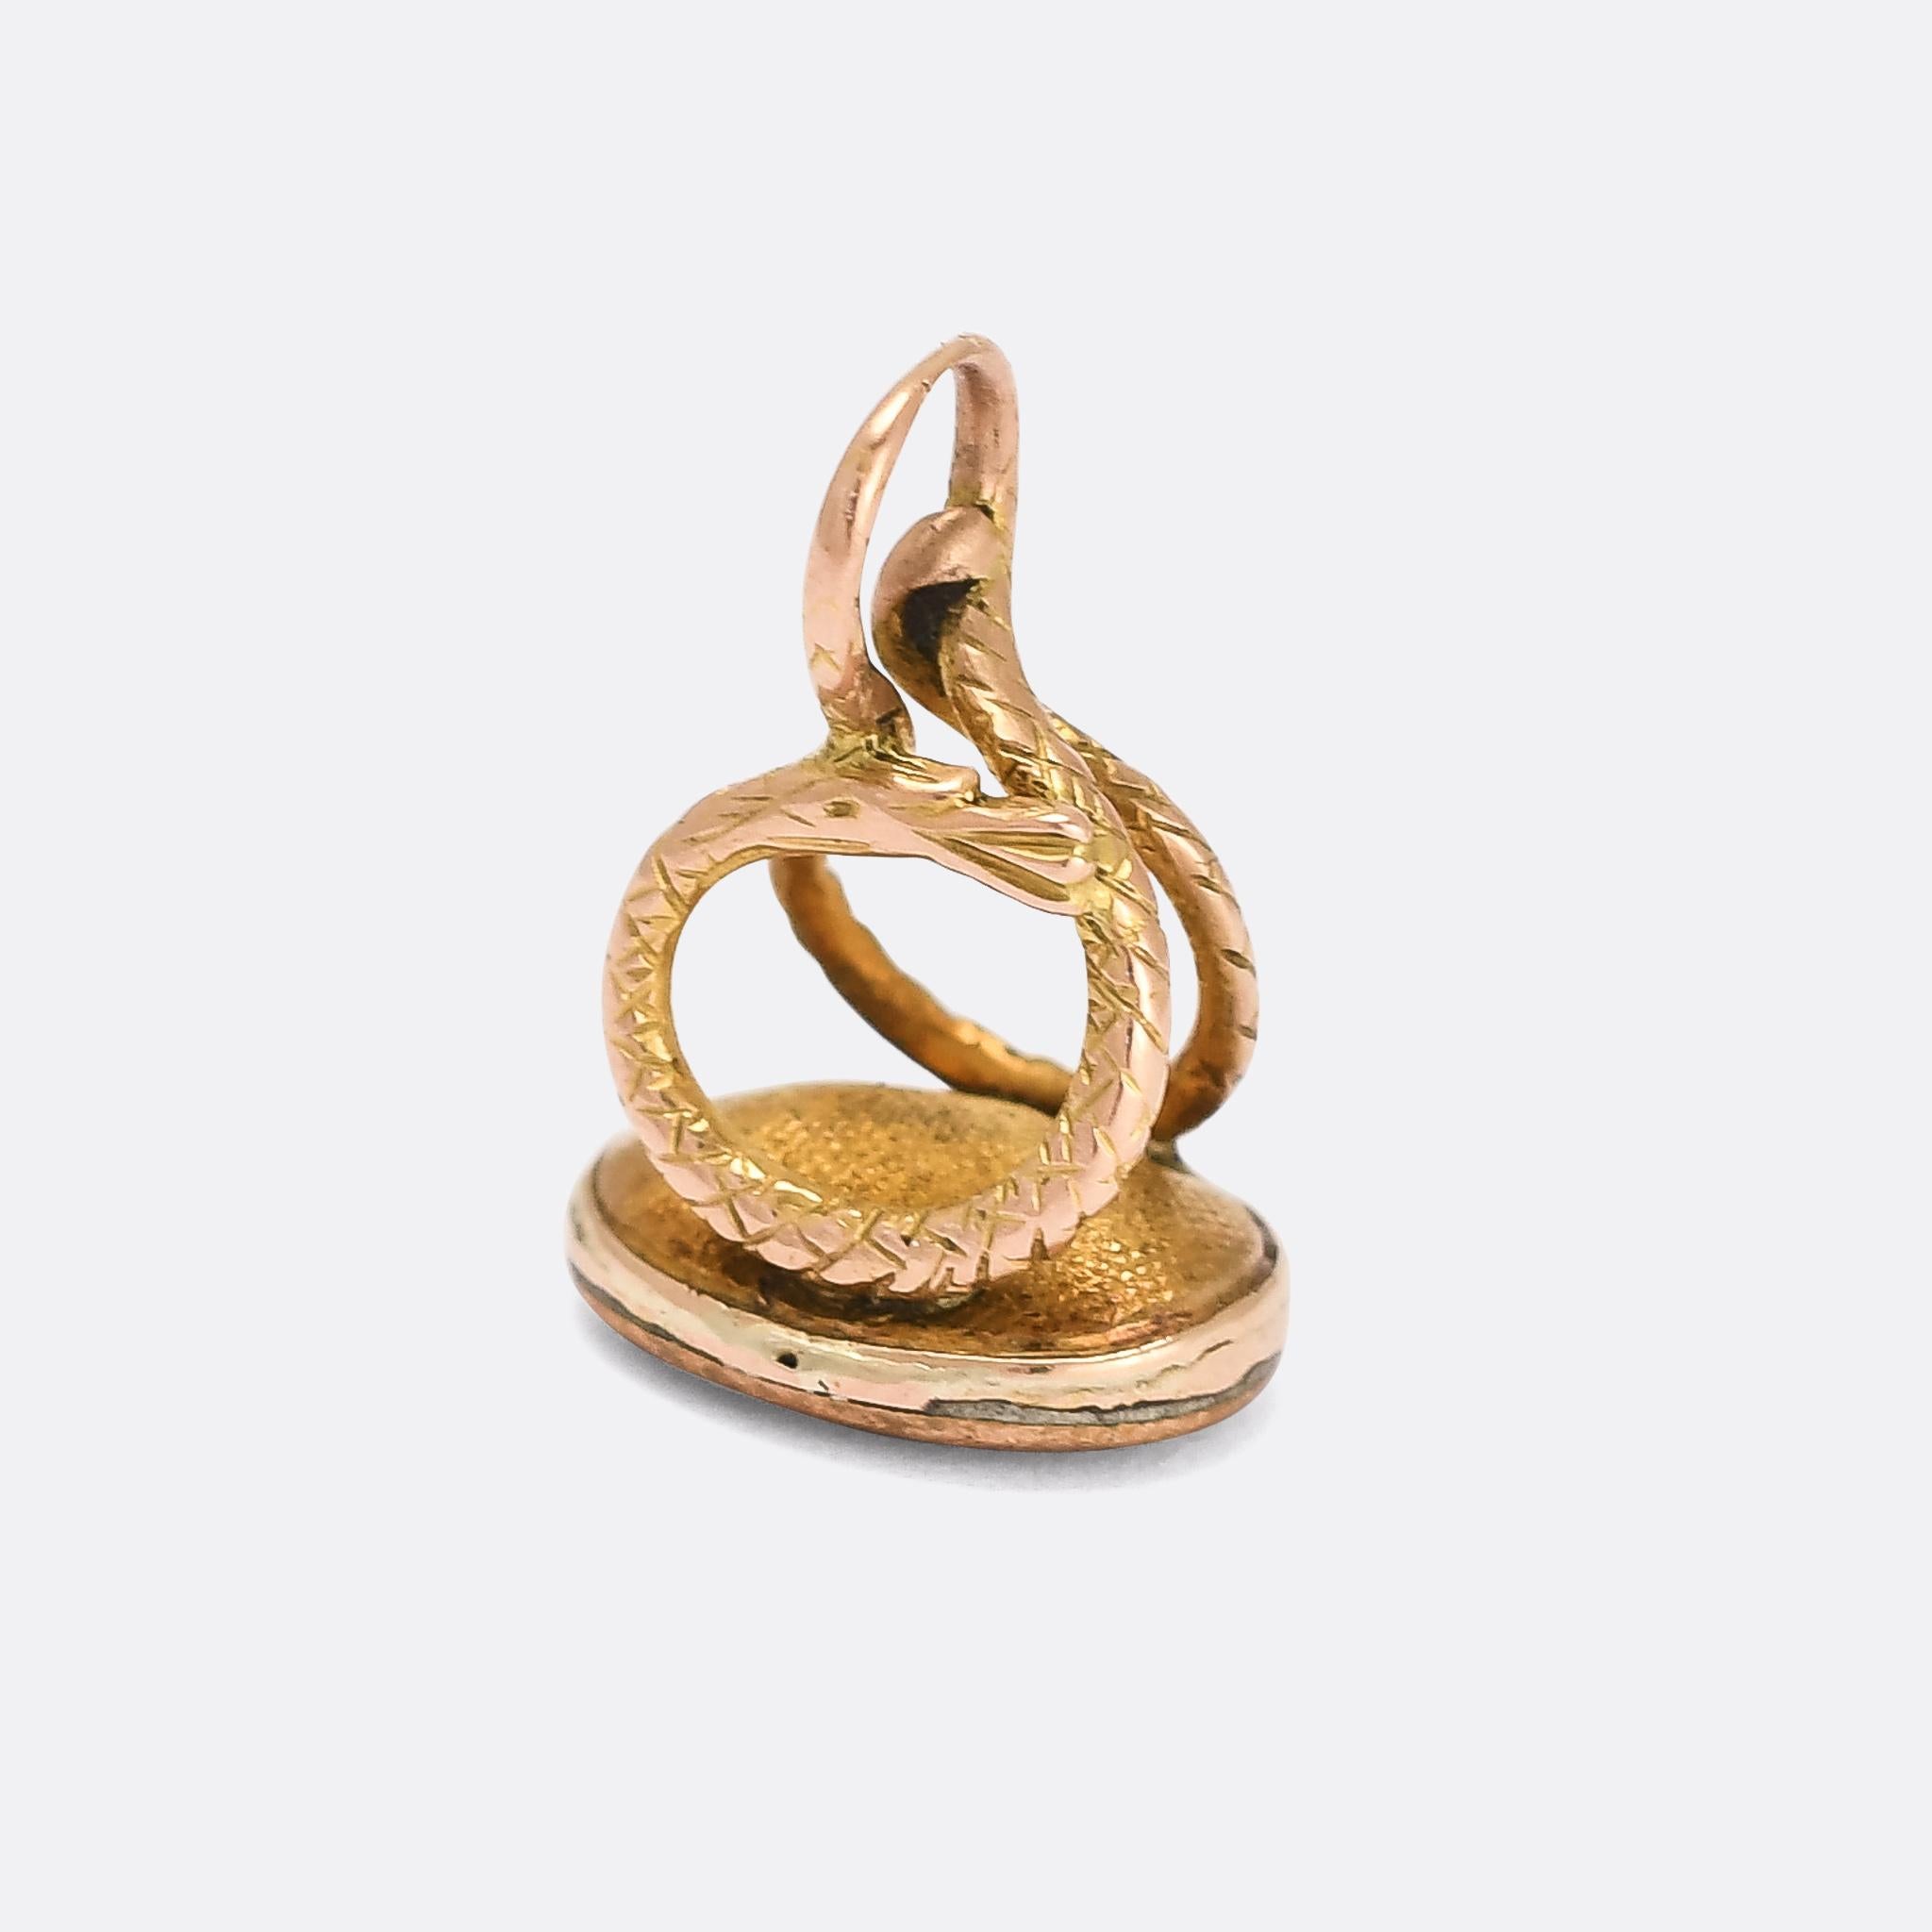 A cool Georgian seal fob dating from the early 19th Century, circa 1810. The body of the fob is a coiled snake, complete with cross-hatched scales, and it's set with an oval chalcedony stone in the base. These fobs were originally worn on the end of